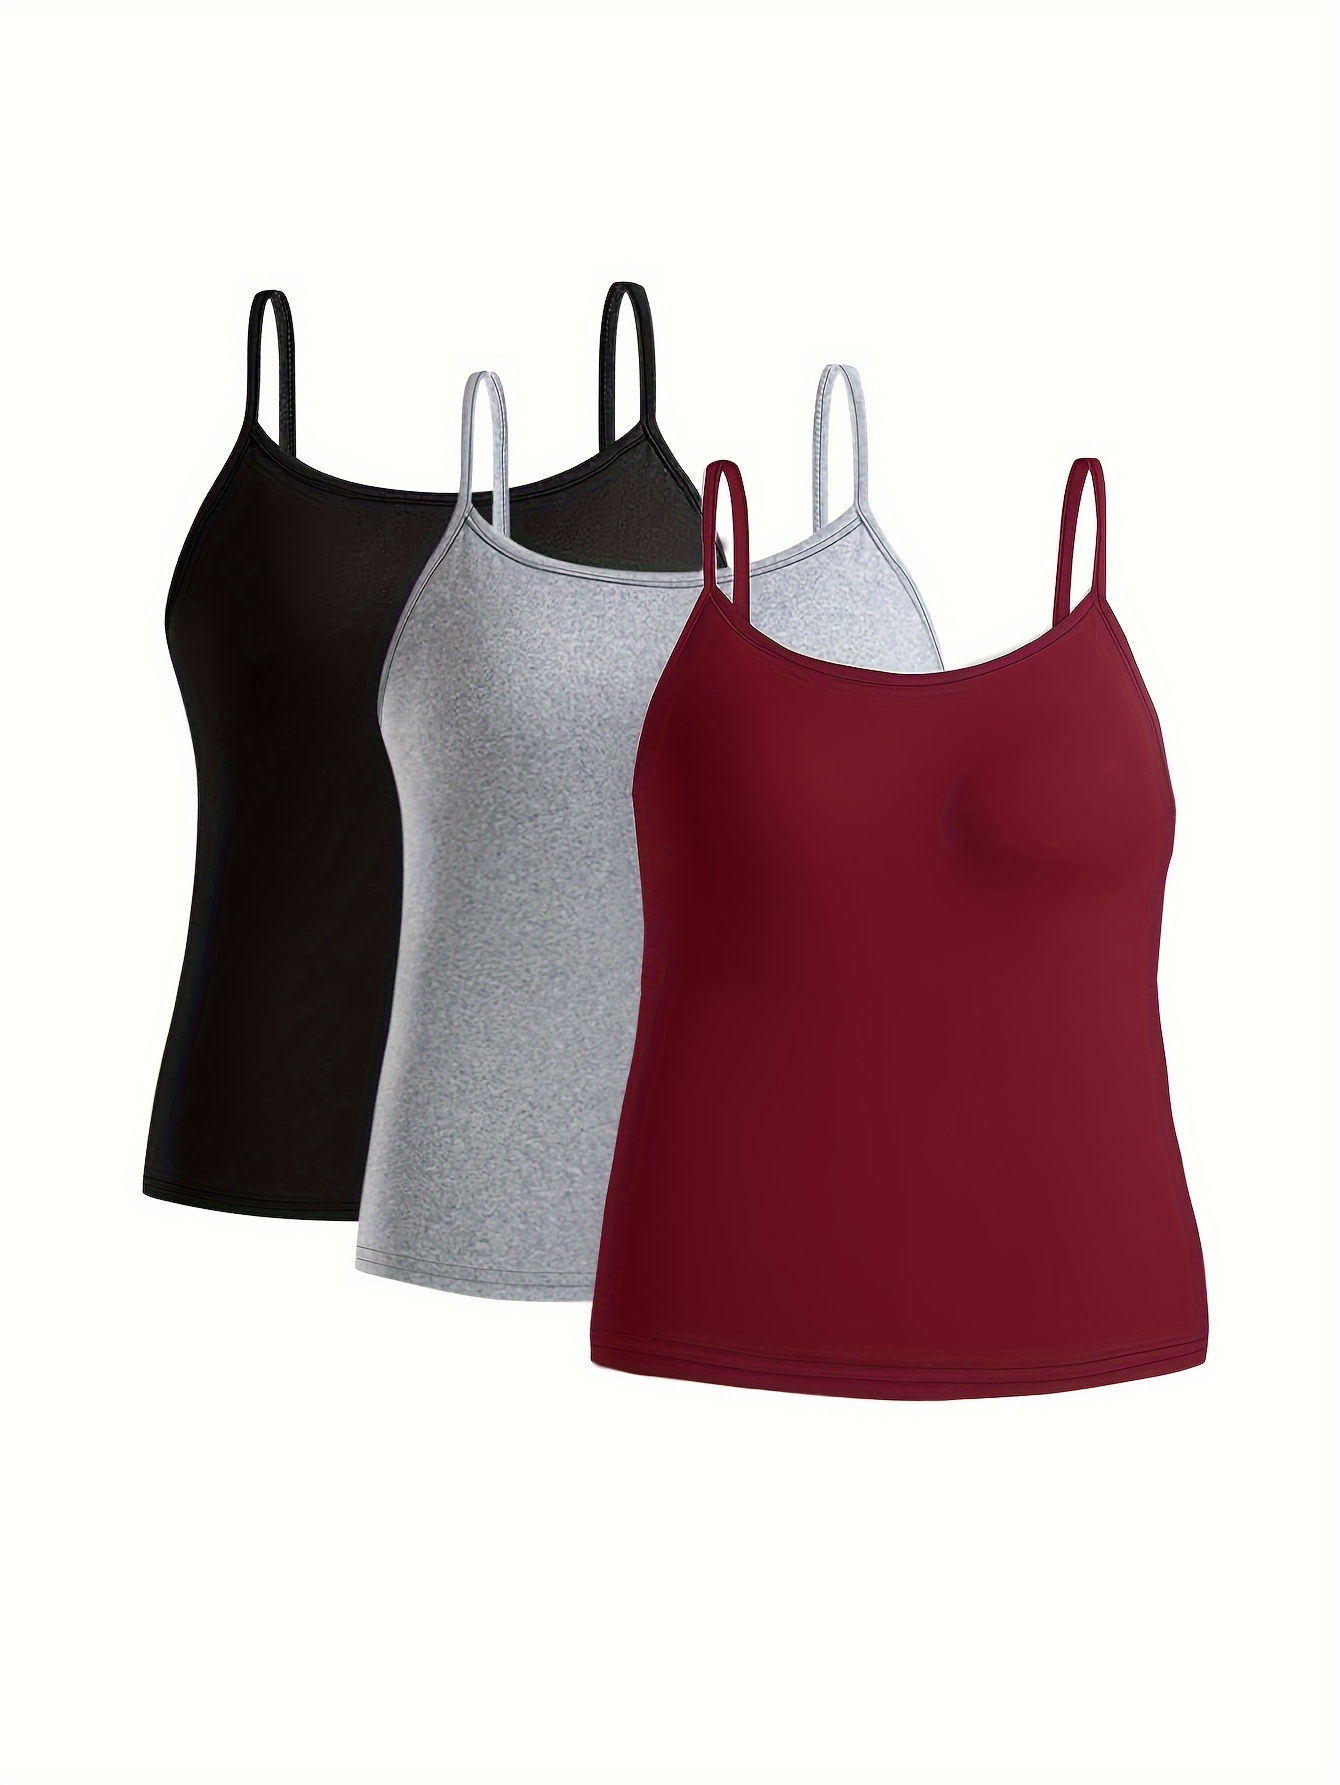 2 PACK] Women's Long Cami Tank Tops Fit Basic Camisole Top W